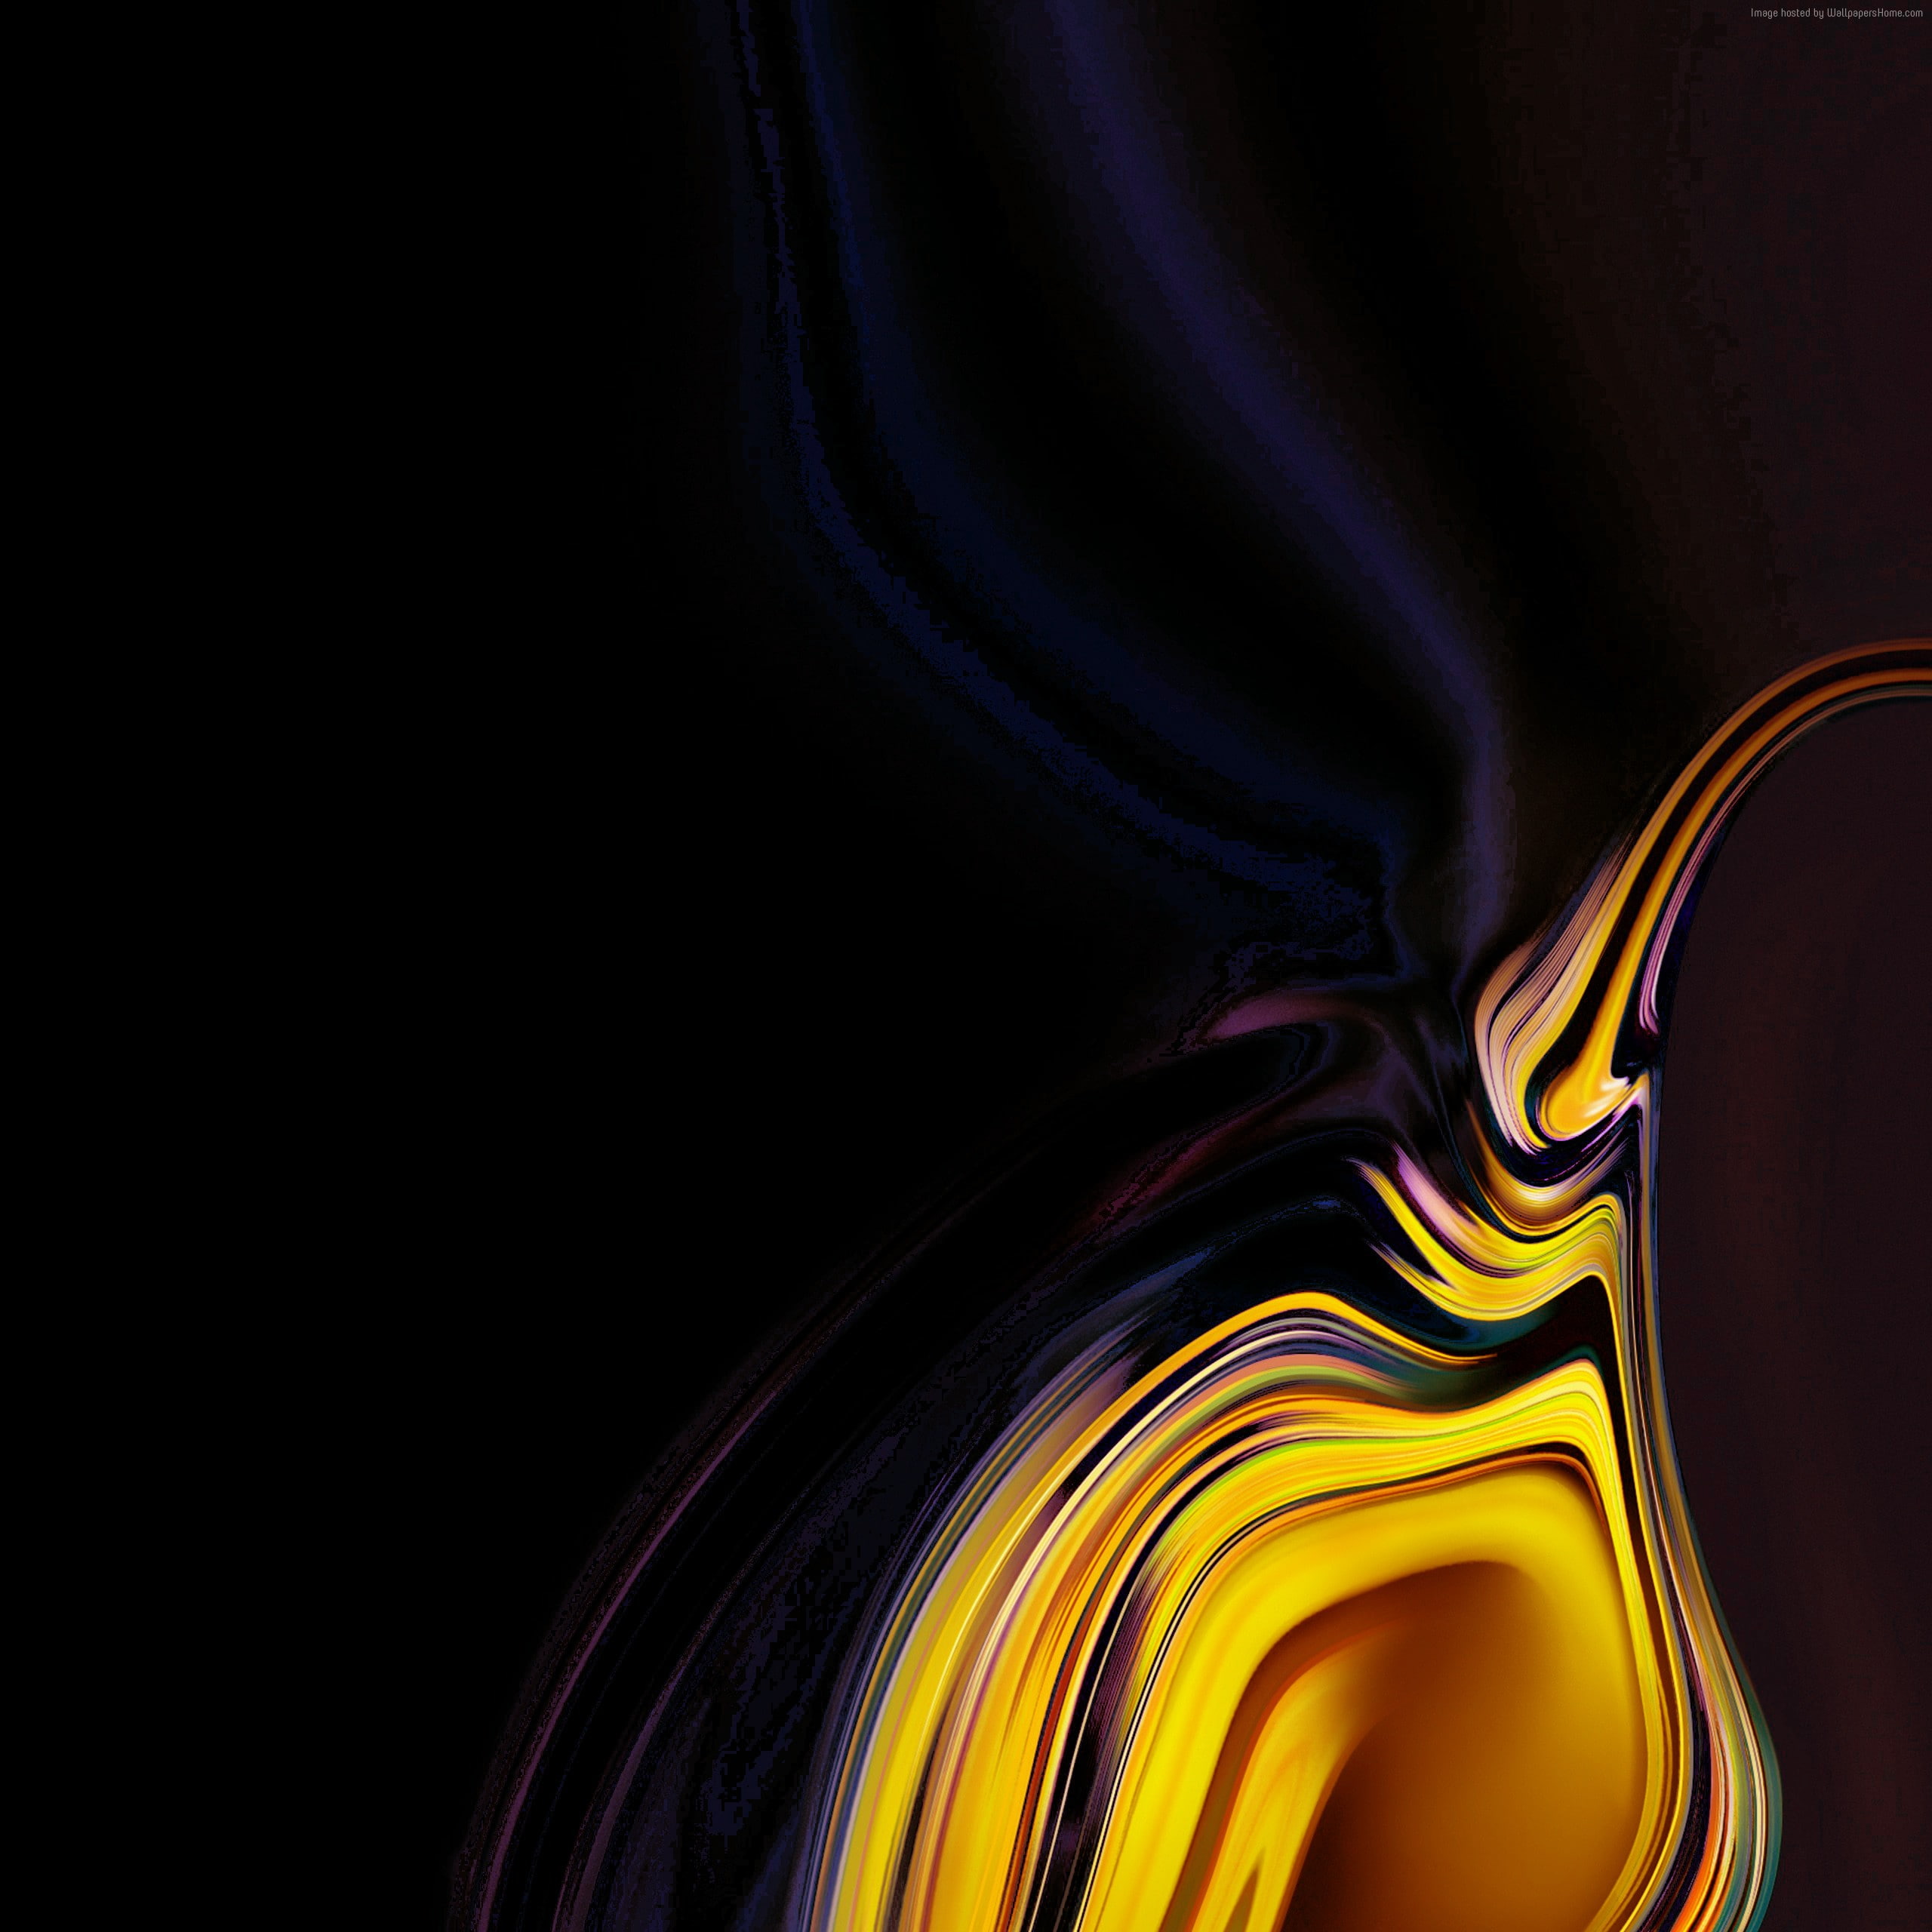 colorful, abstract, Samsung Galaxy Note 9, Android Oreo, Android 8.0